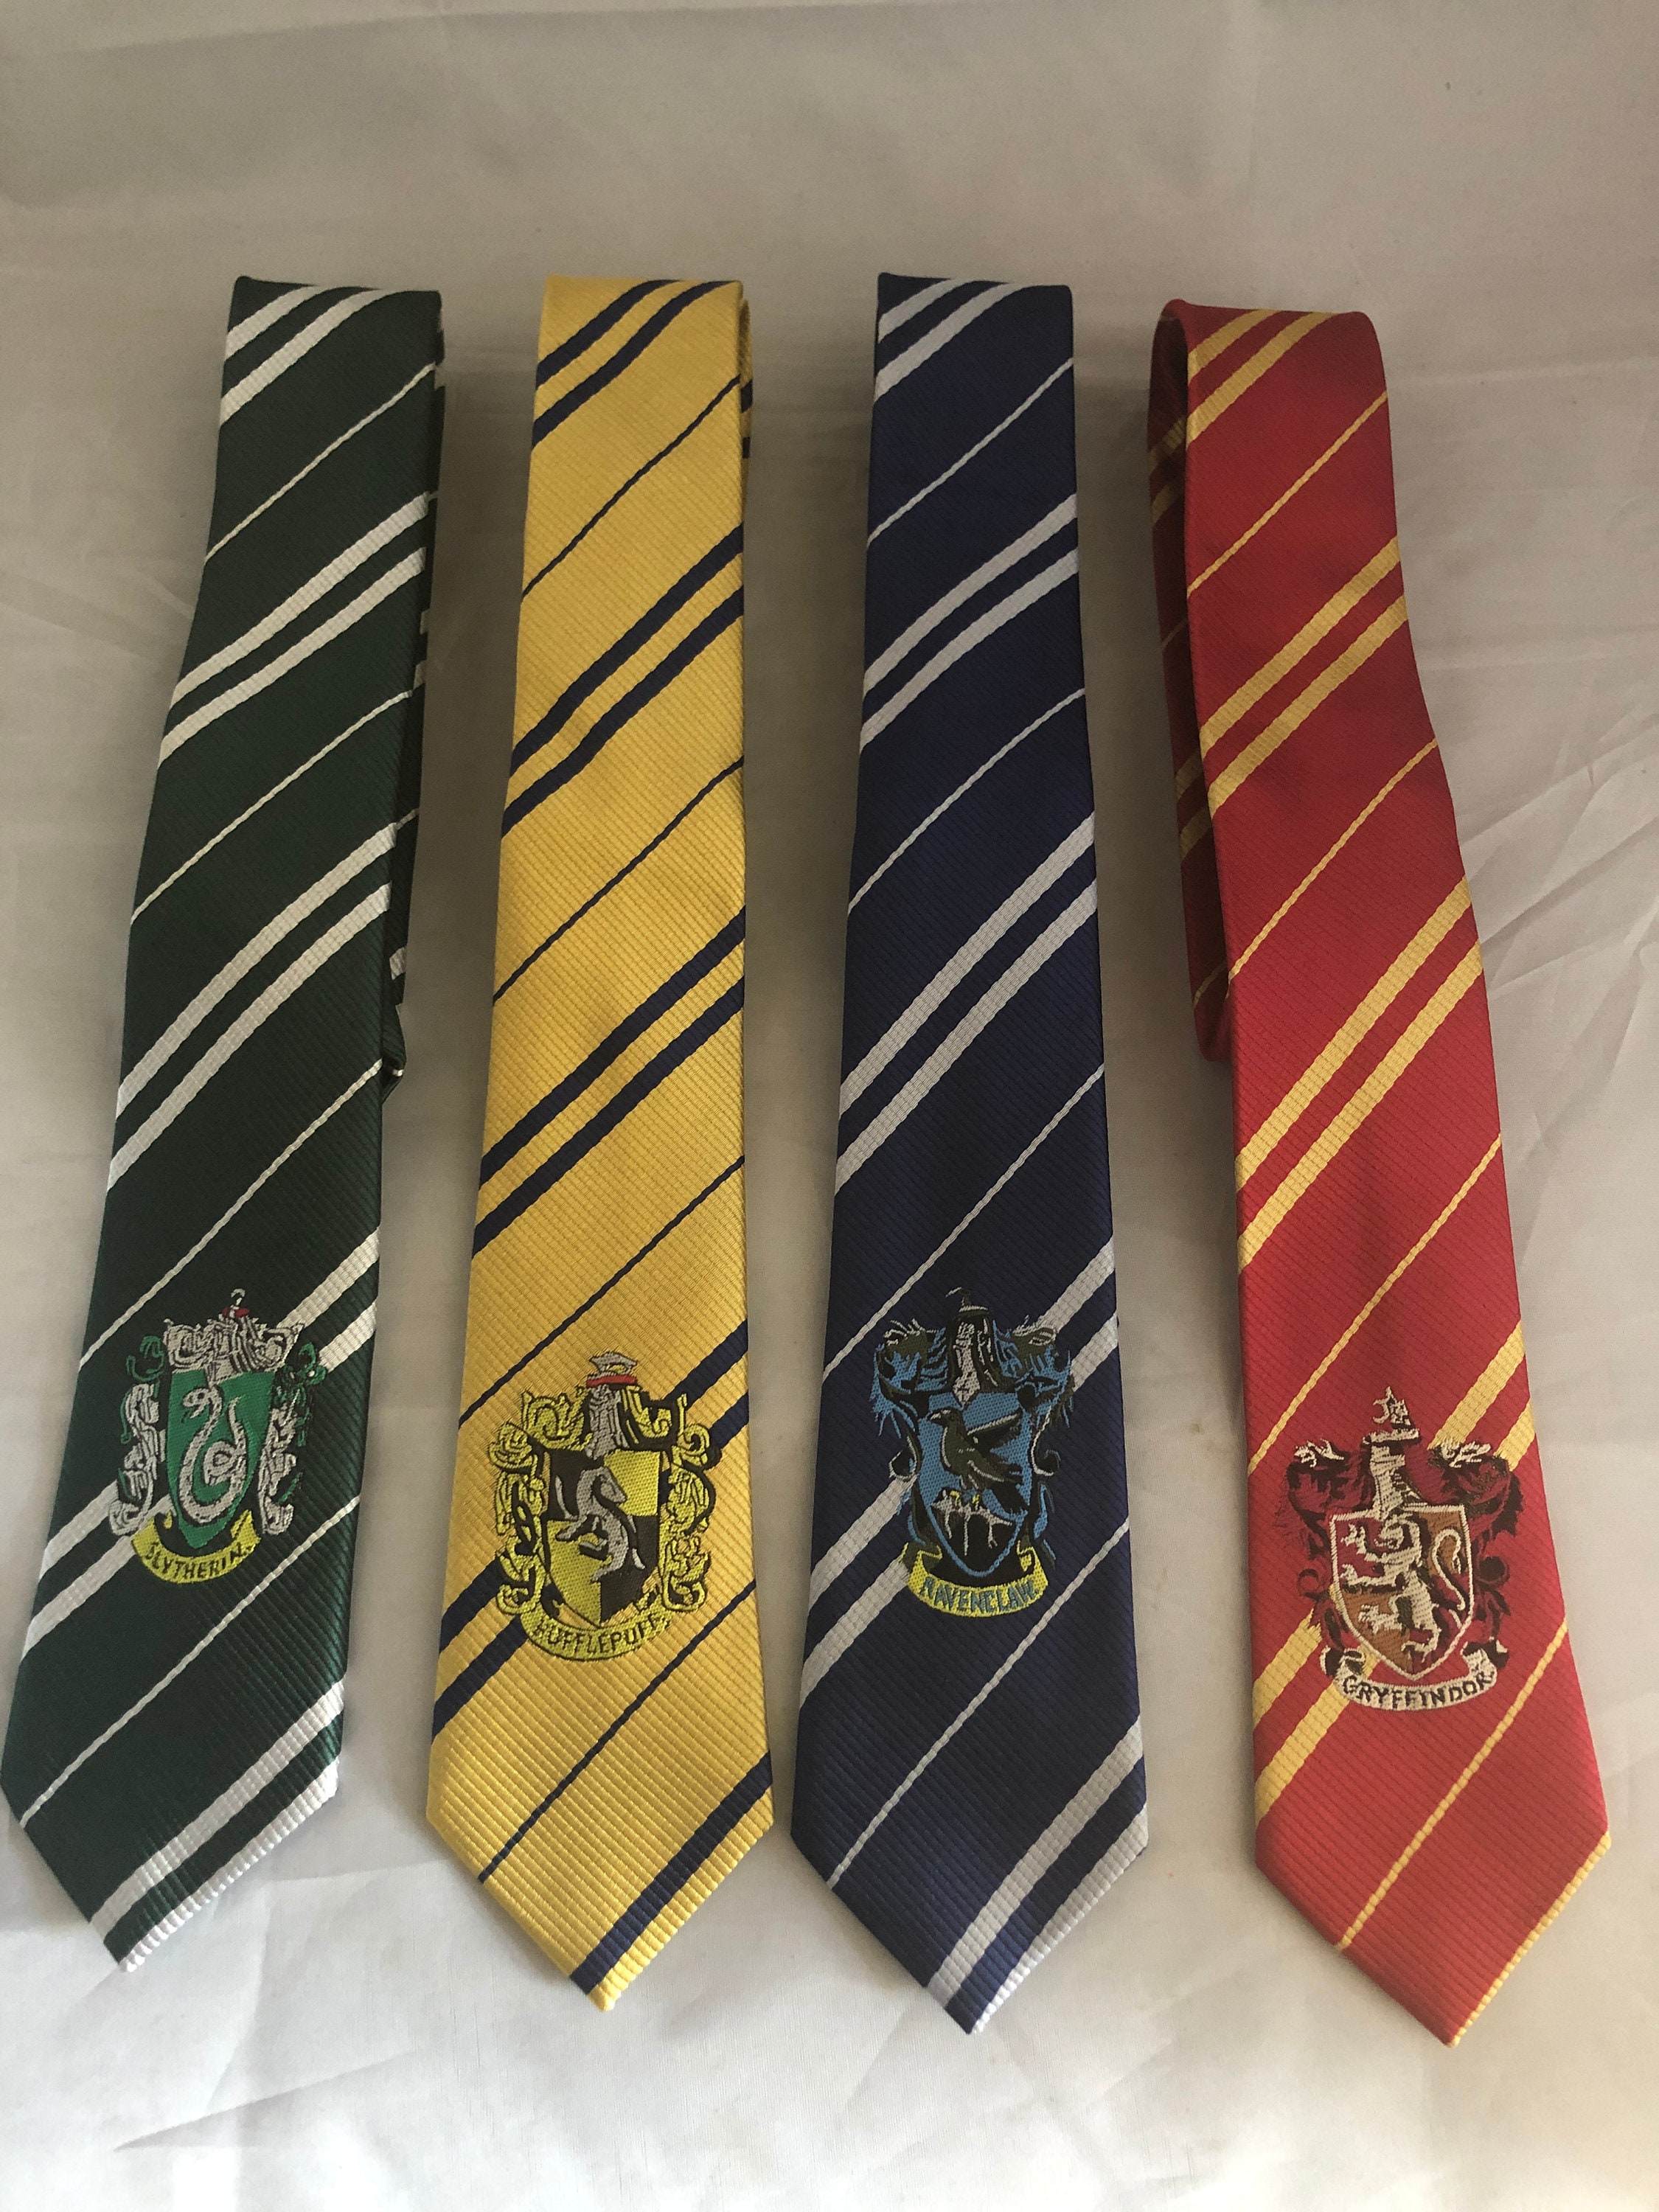 Harry Potter Necktie - Choose a house Tie - Gryffindor Slytherin Ravenclaw  Hufflepuff - Misprinted - free delivery